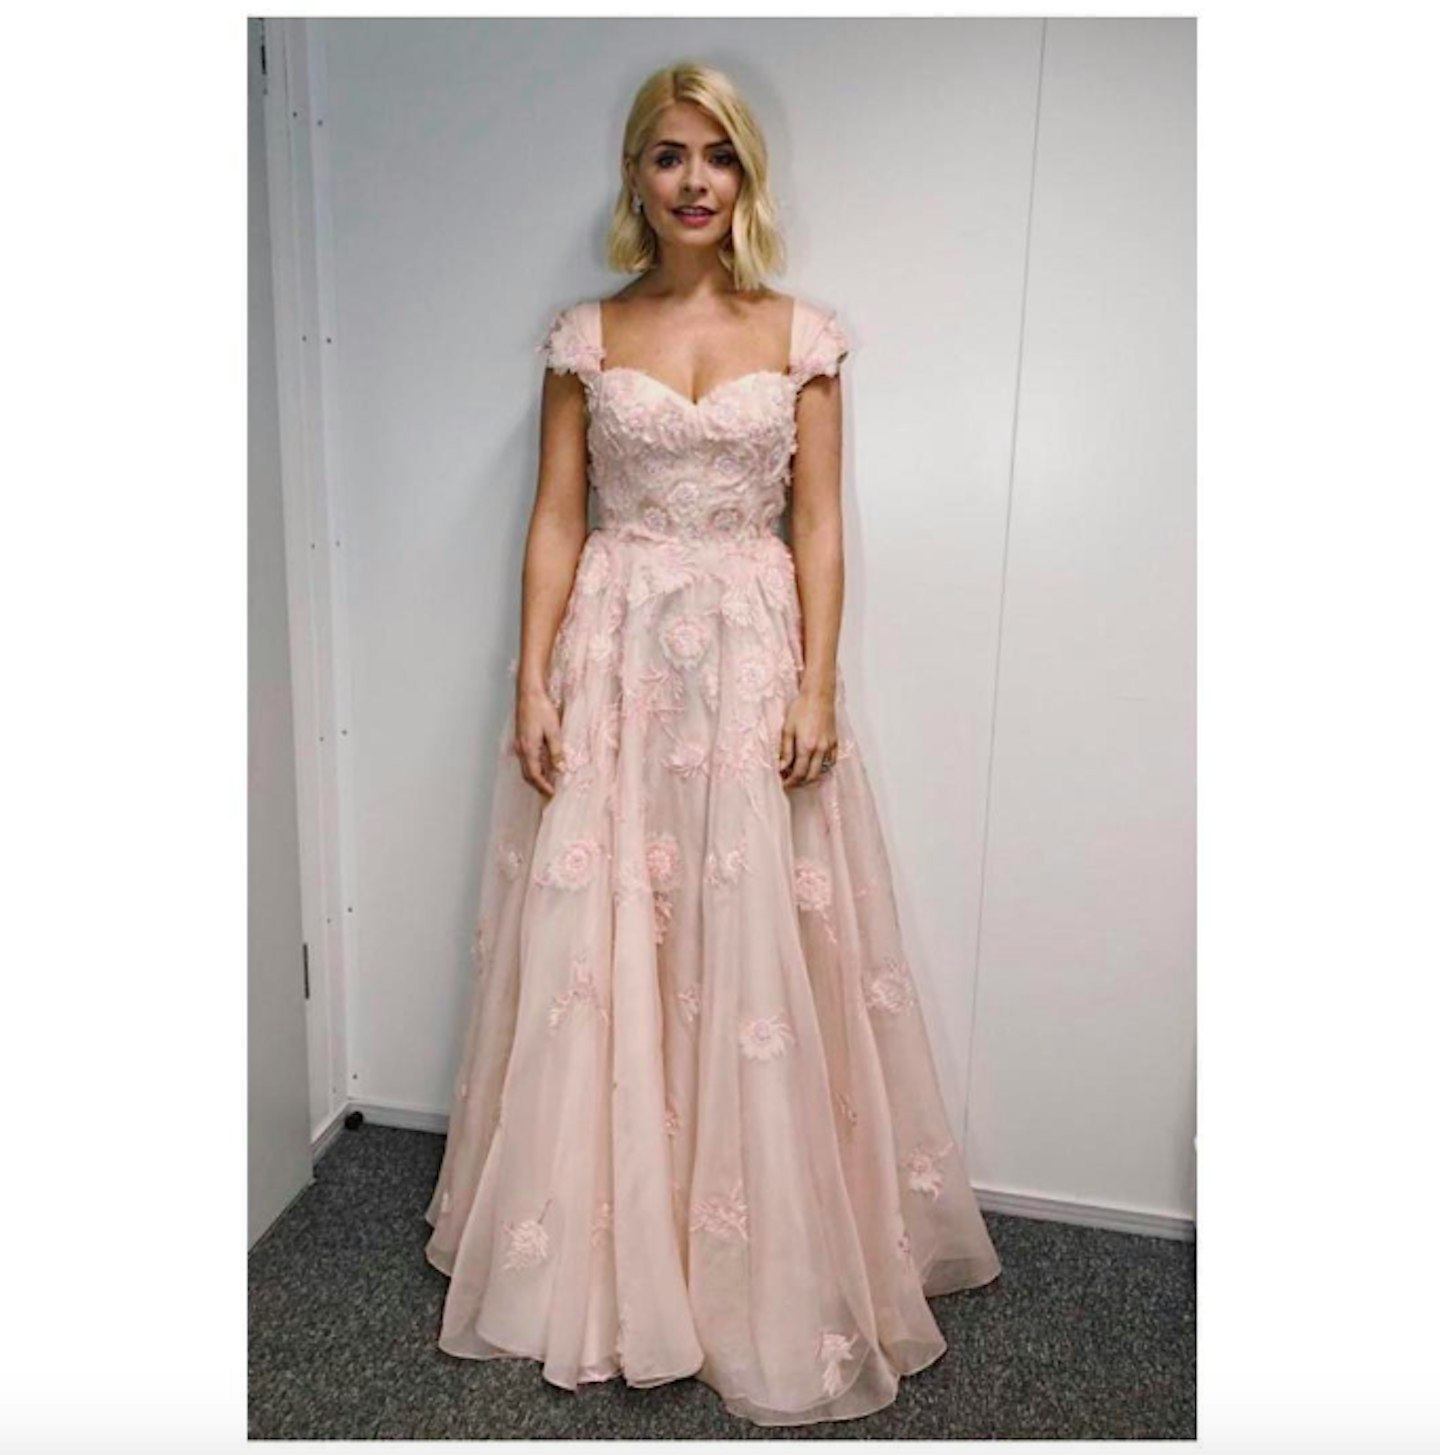 holly willoughby dancing on ice outfit week 5 2019